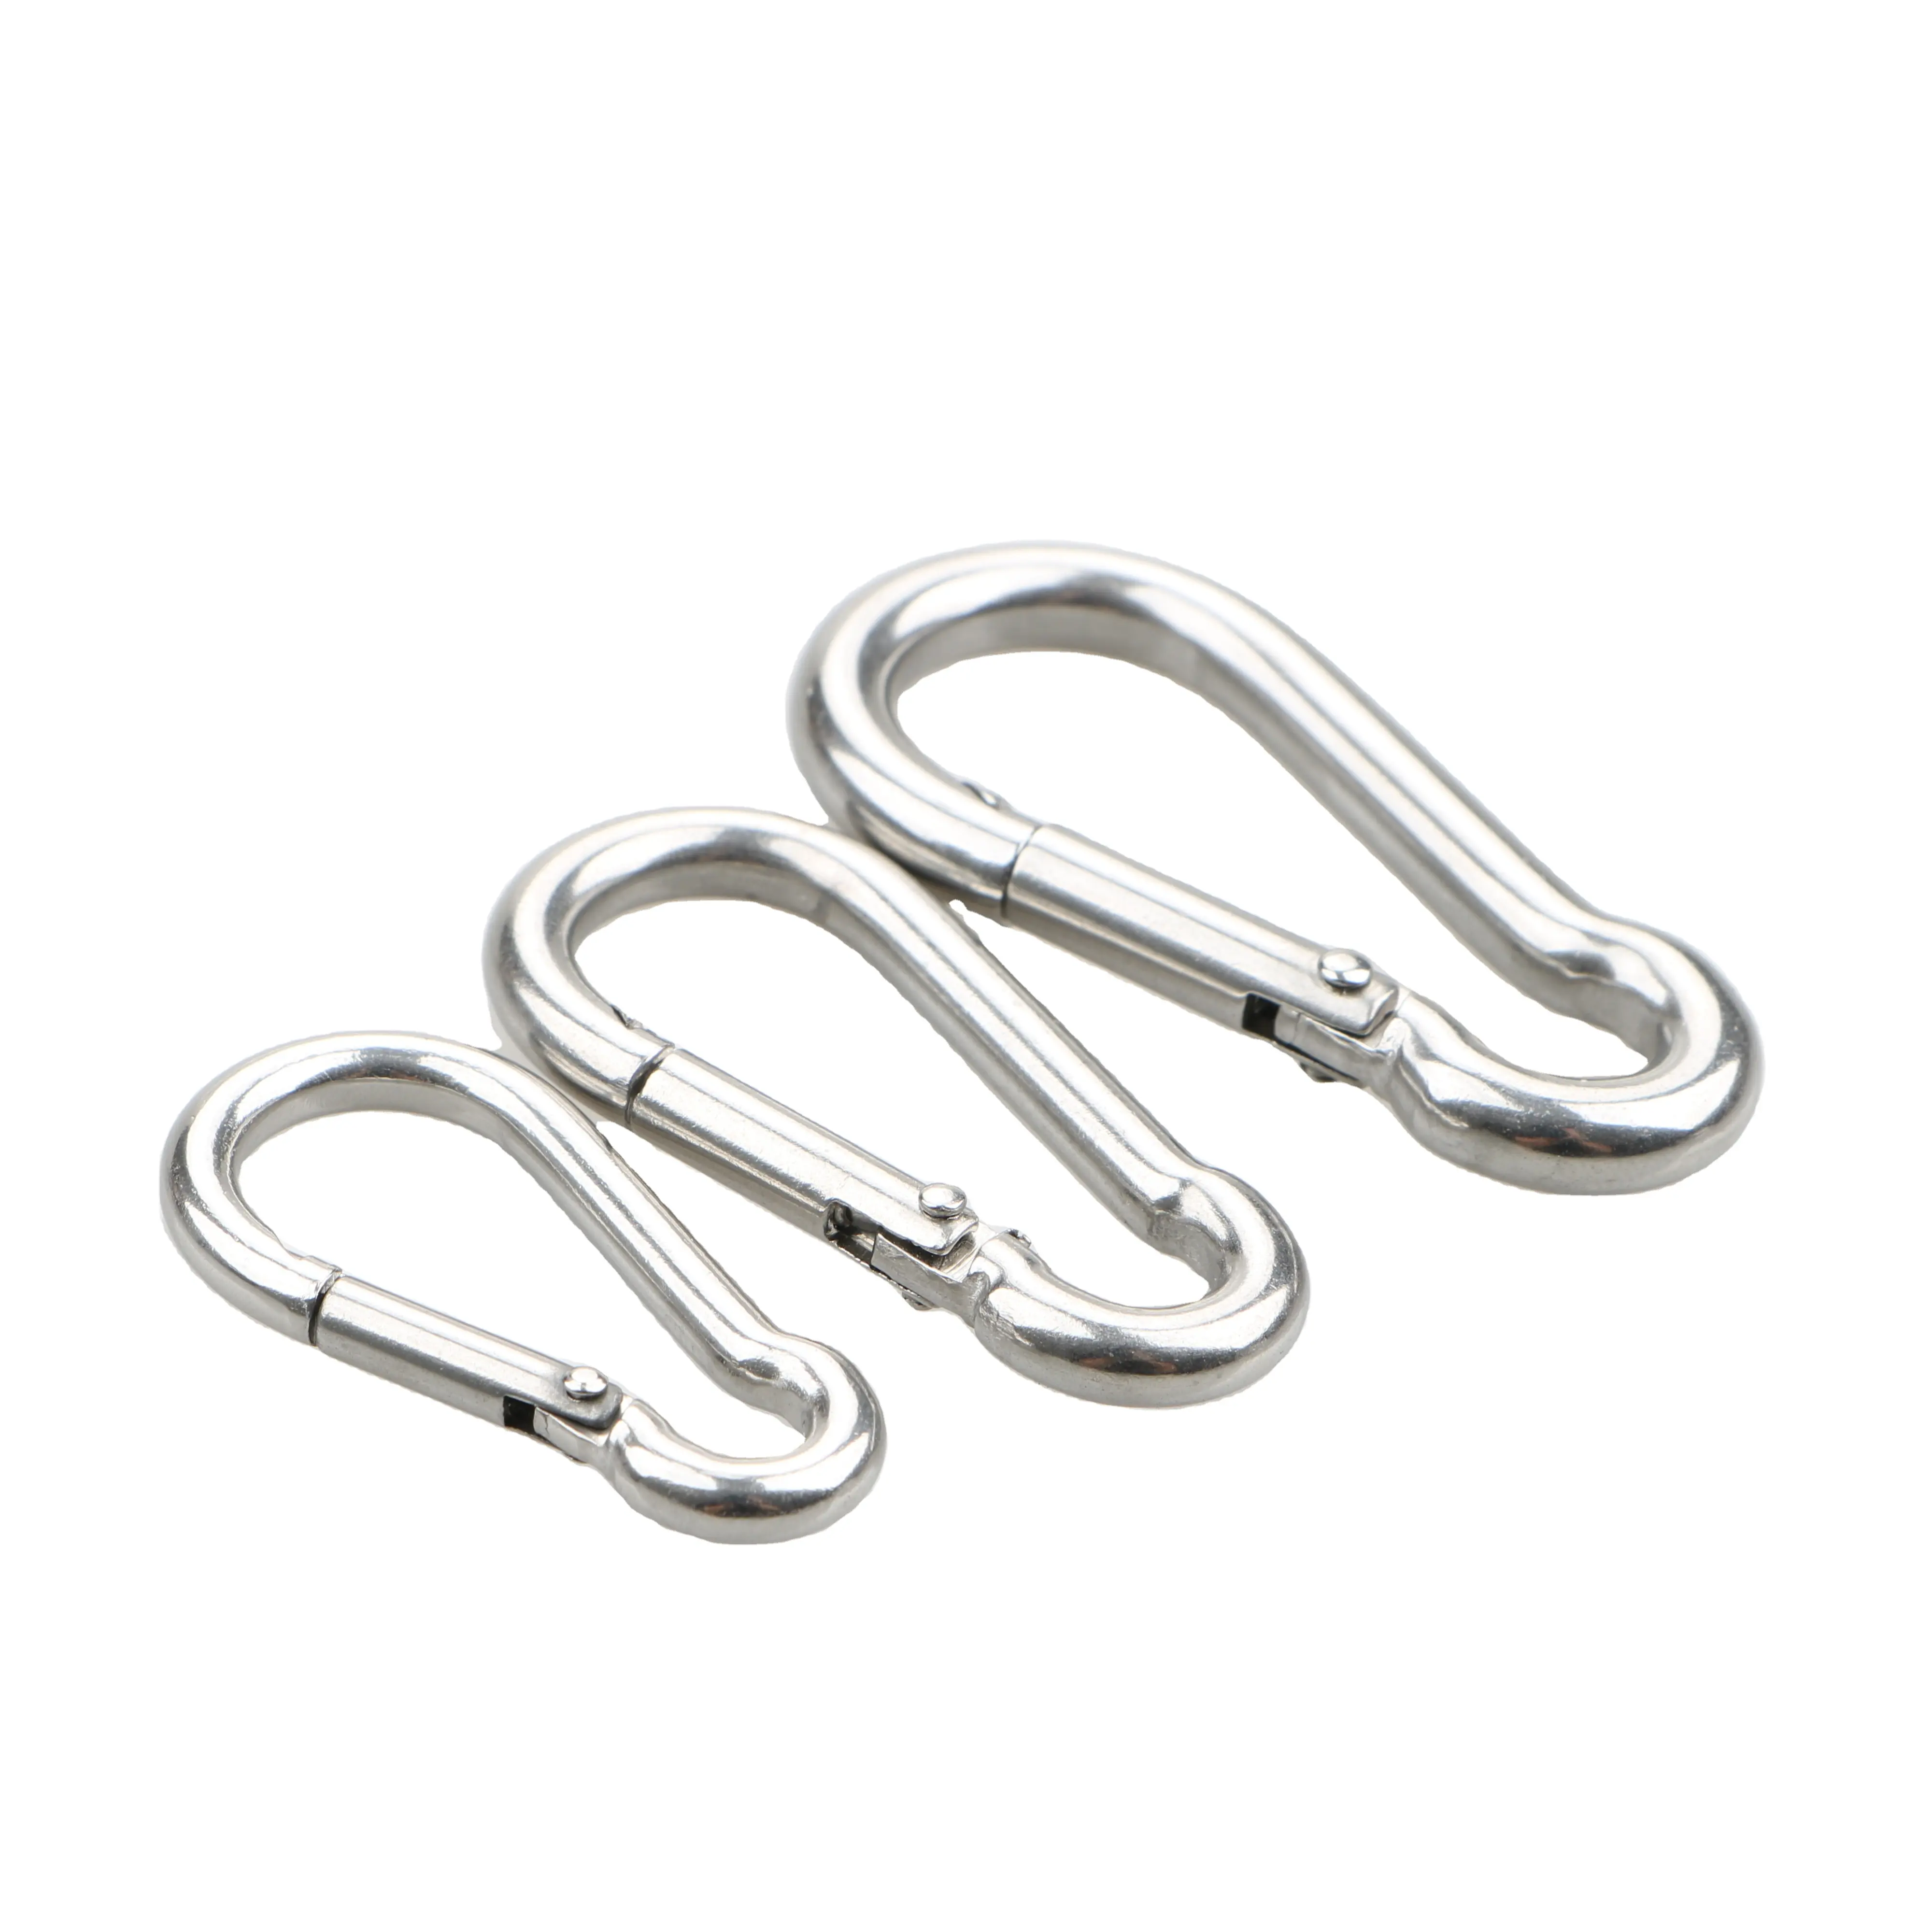 High Quality 304/316 Stainless Steel Carabiners Rigging Hardware Commercial Snap Hook Din5299c Snap Hook